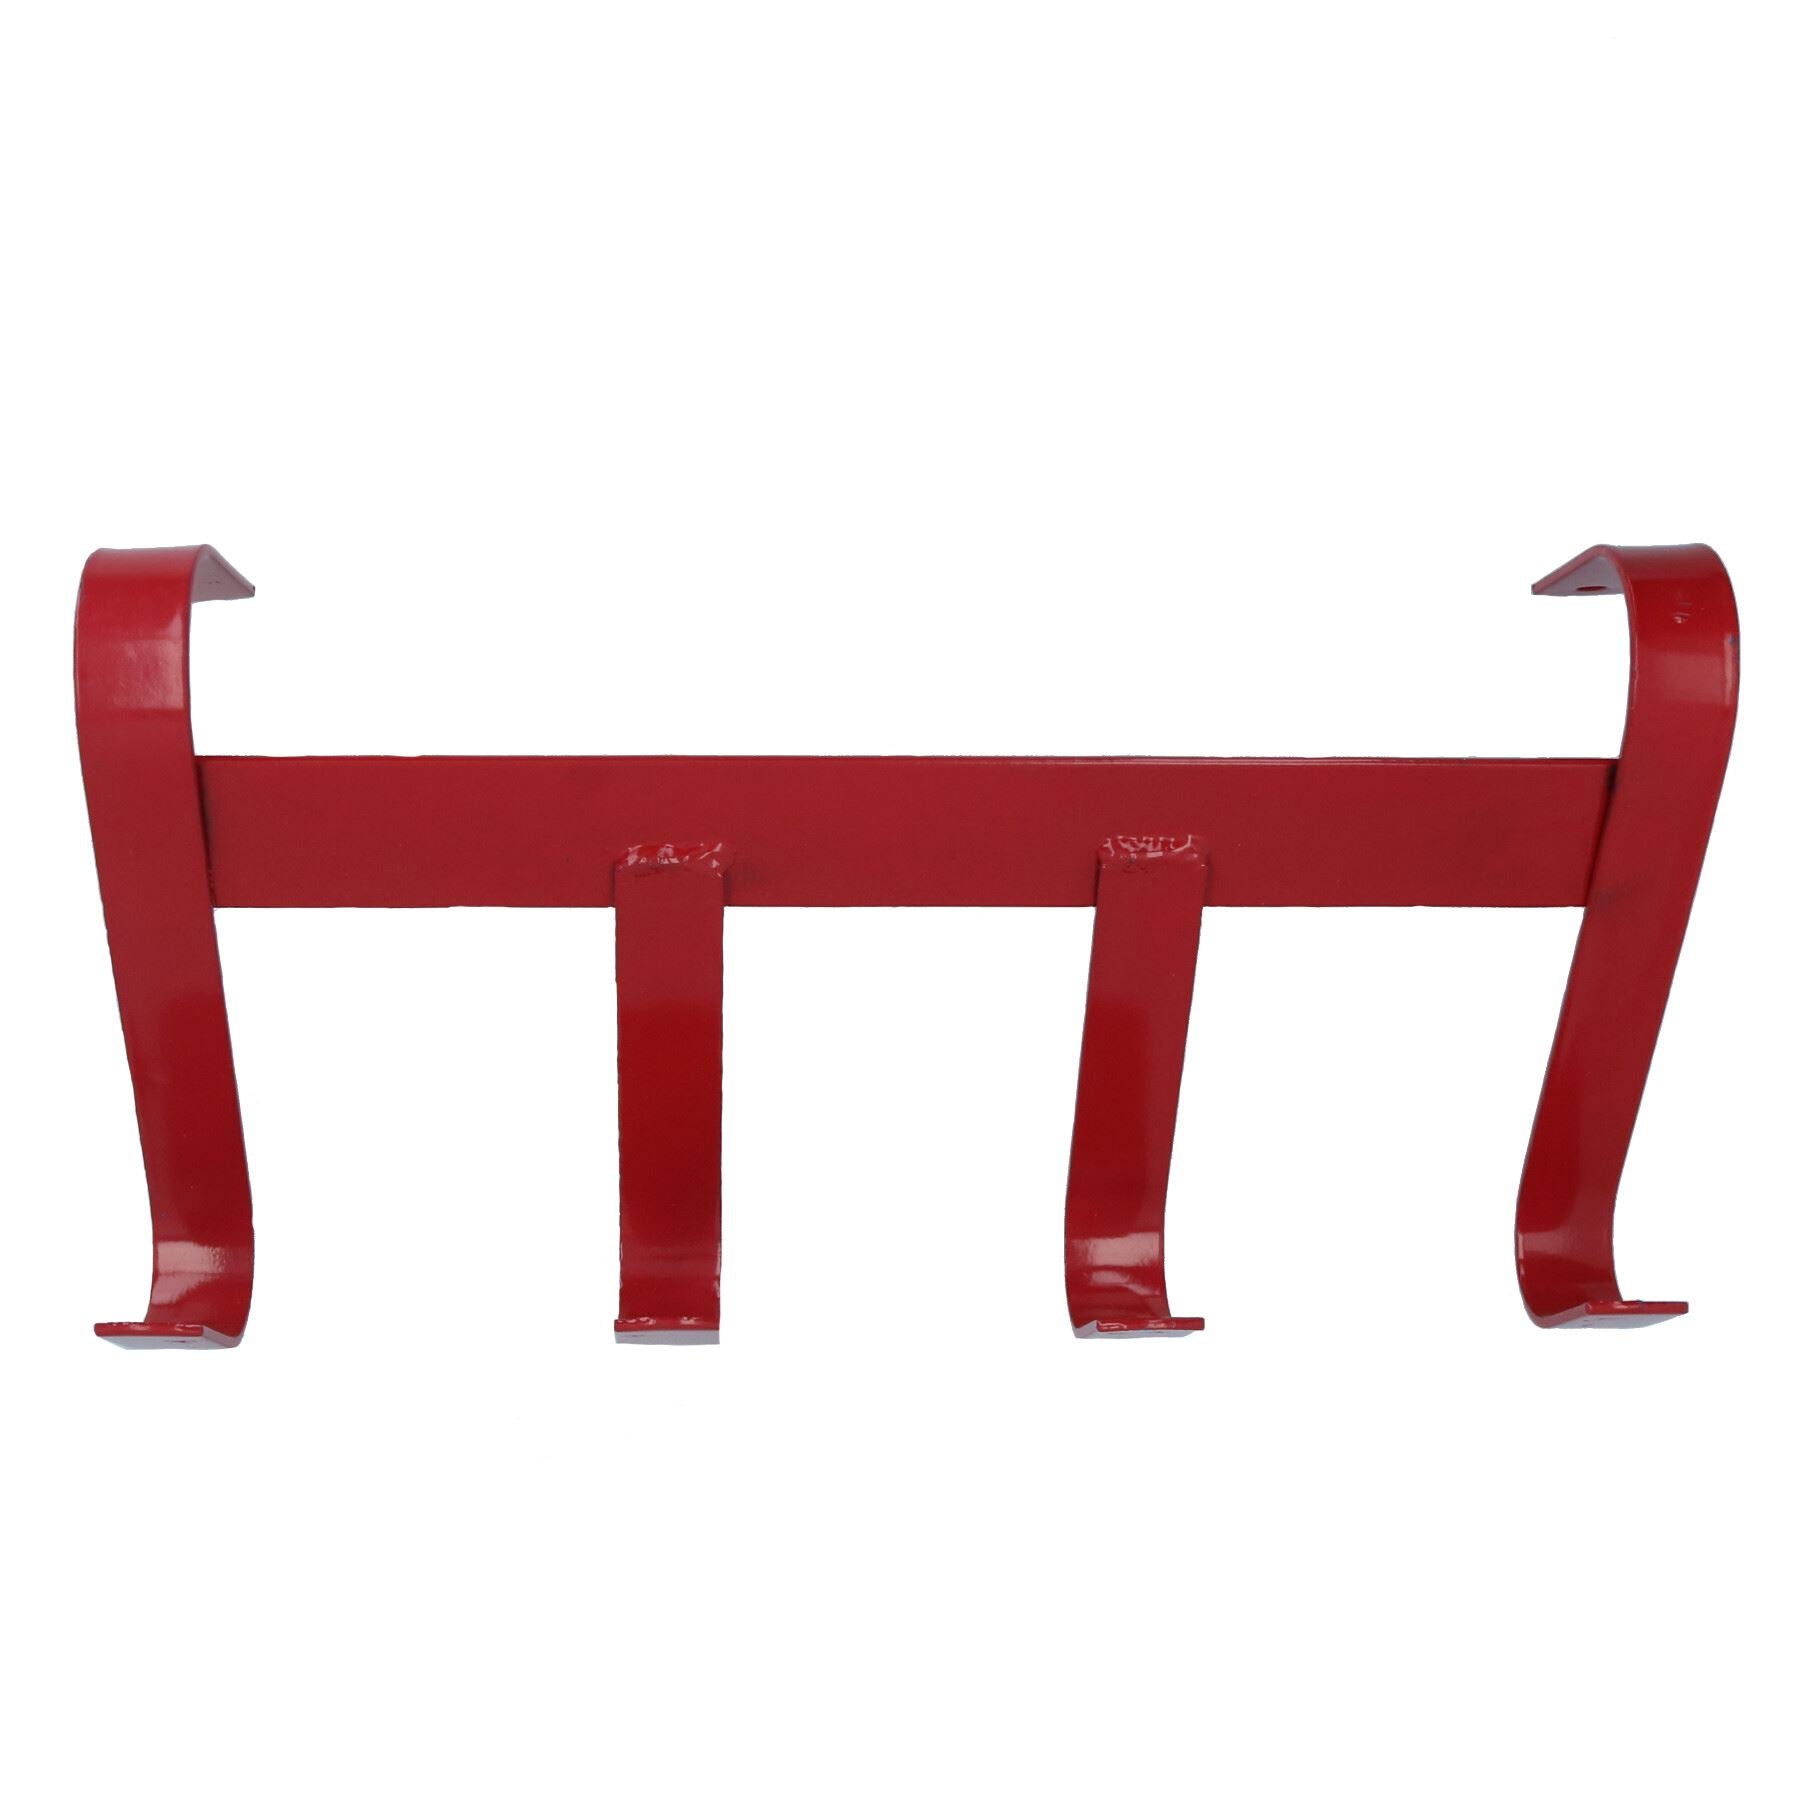 1 Heavy Duty Red Equestrian Horse Stable Tack Room 4 Hook Handy Hanger